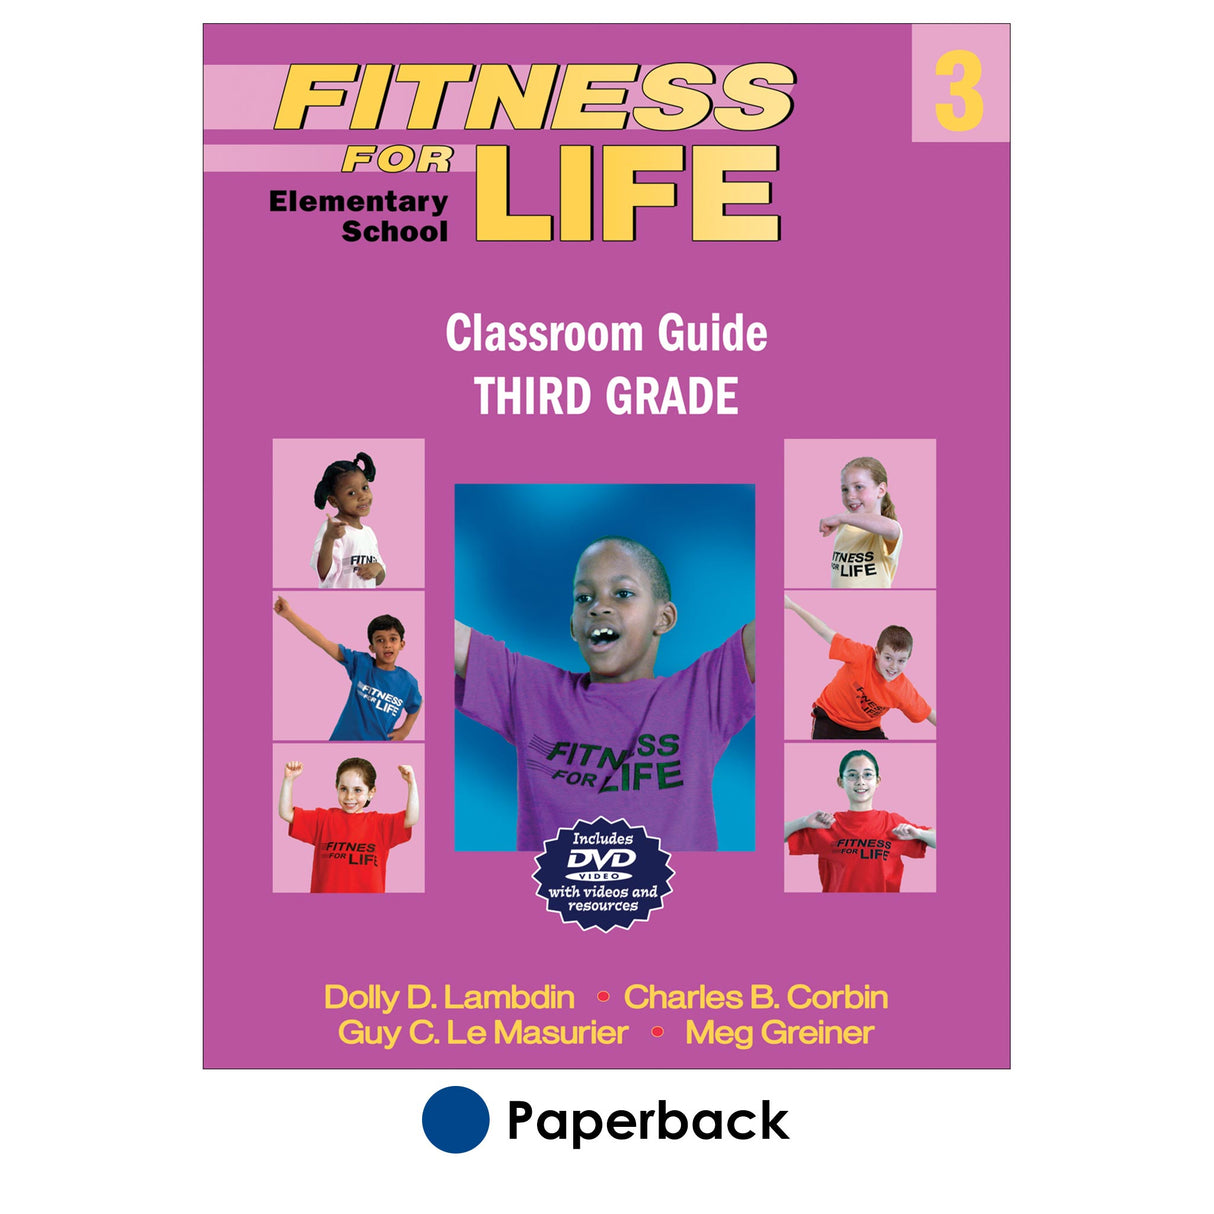 Fitness for LIfe Elementary School Classroom Guide: Third Grade